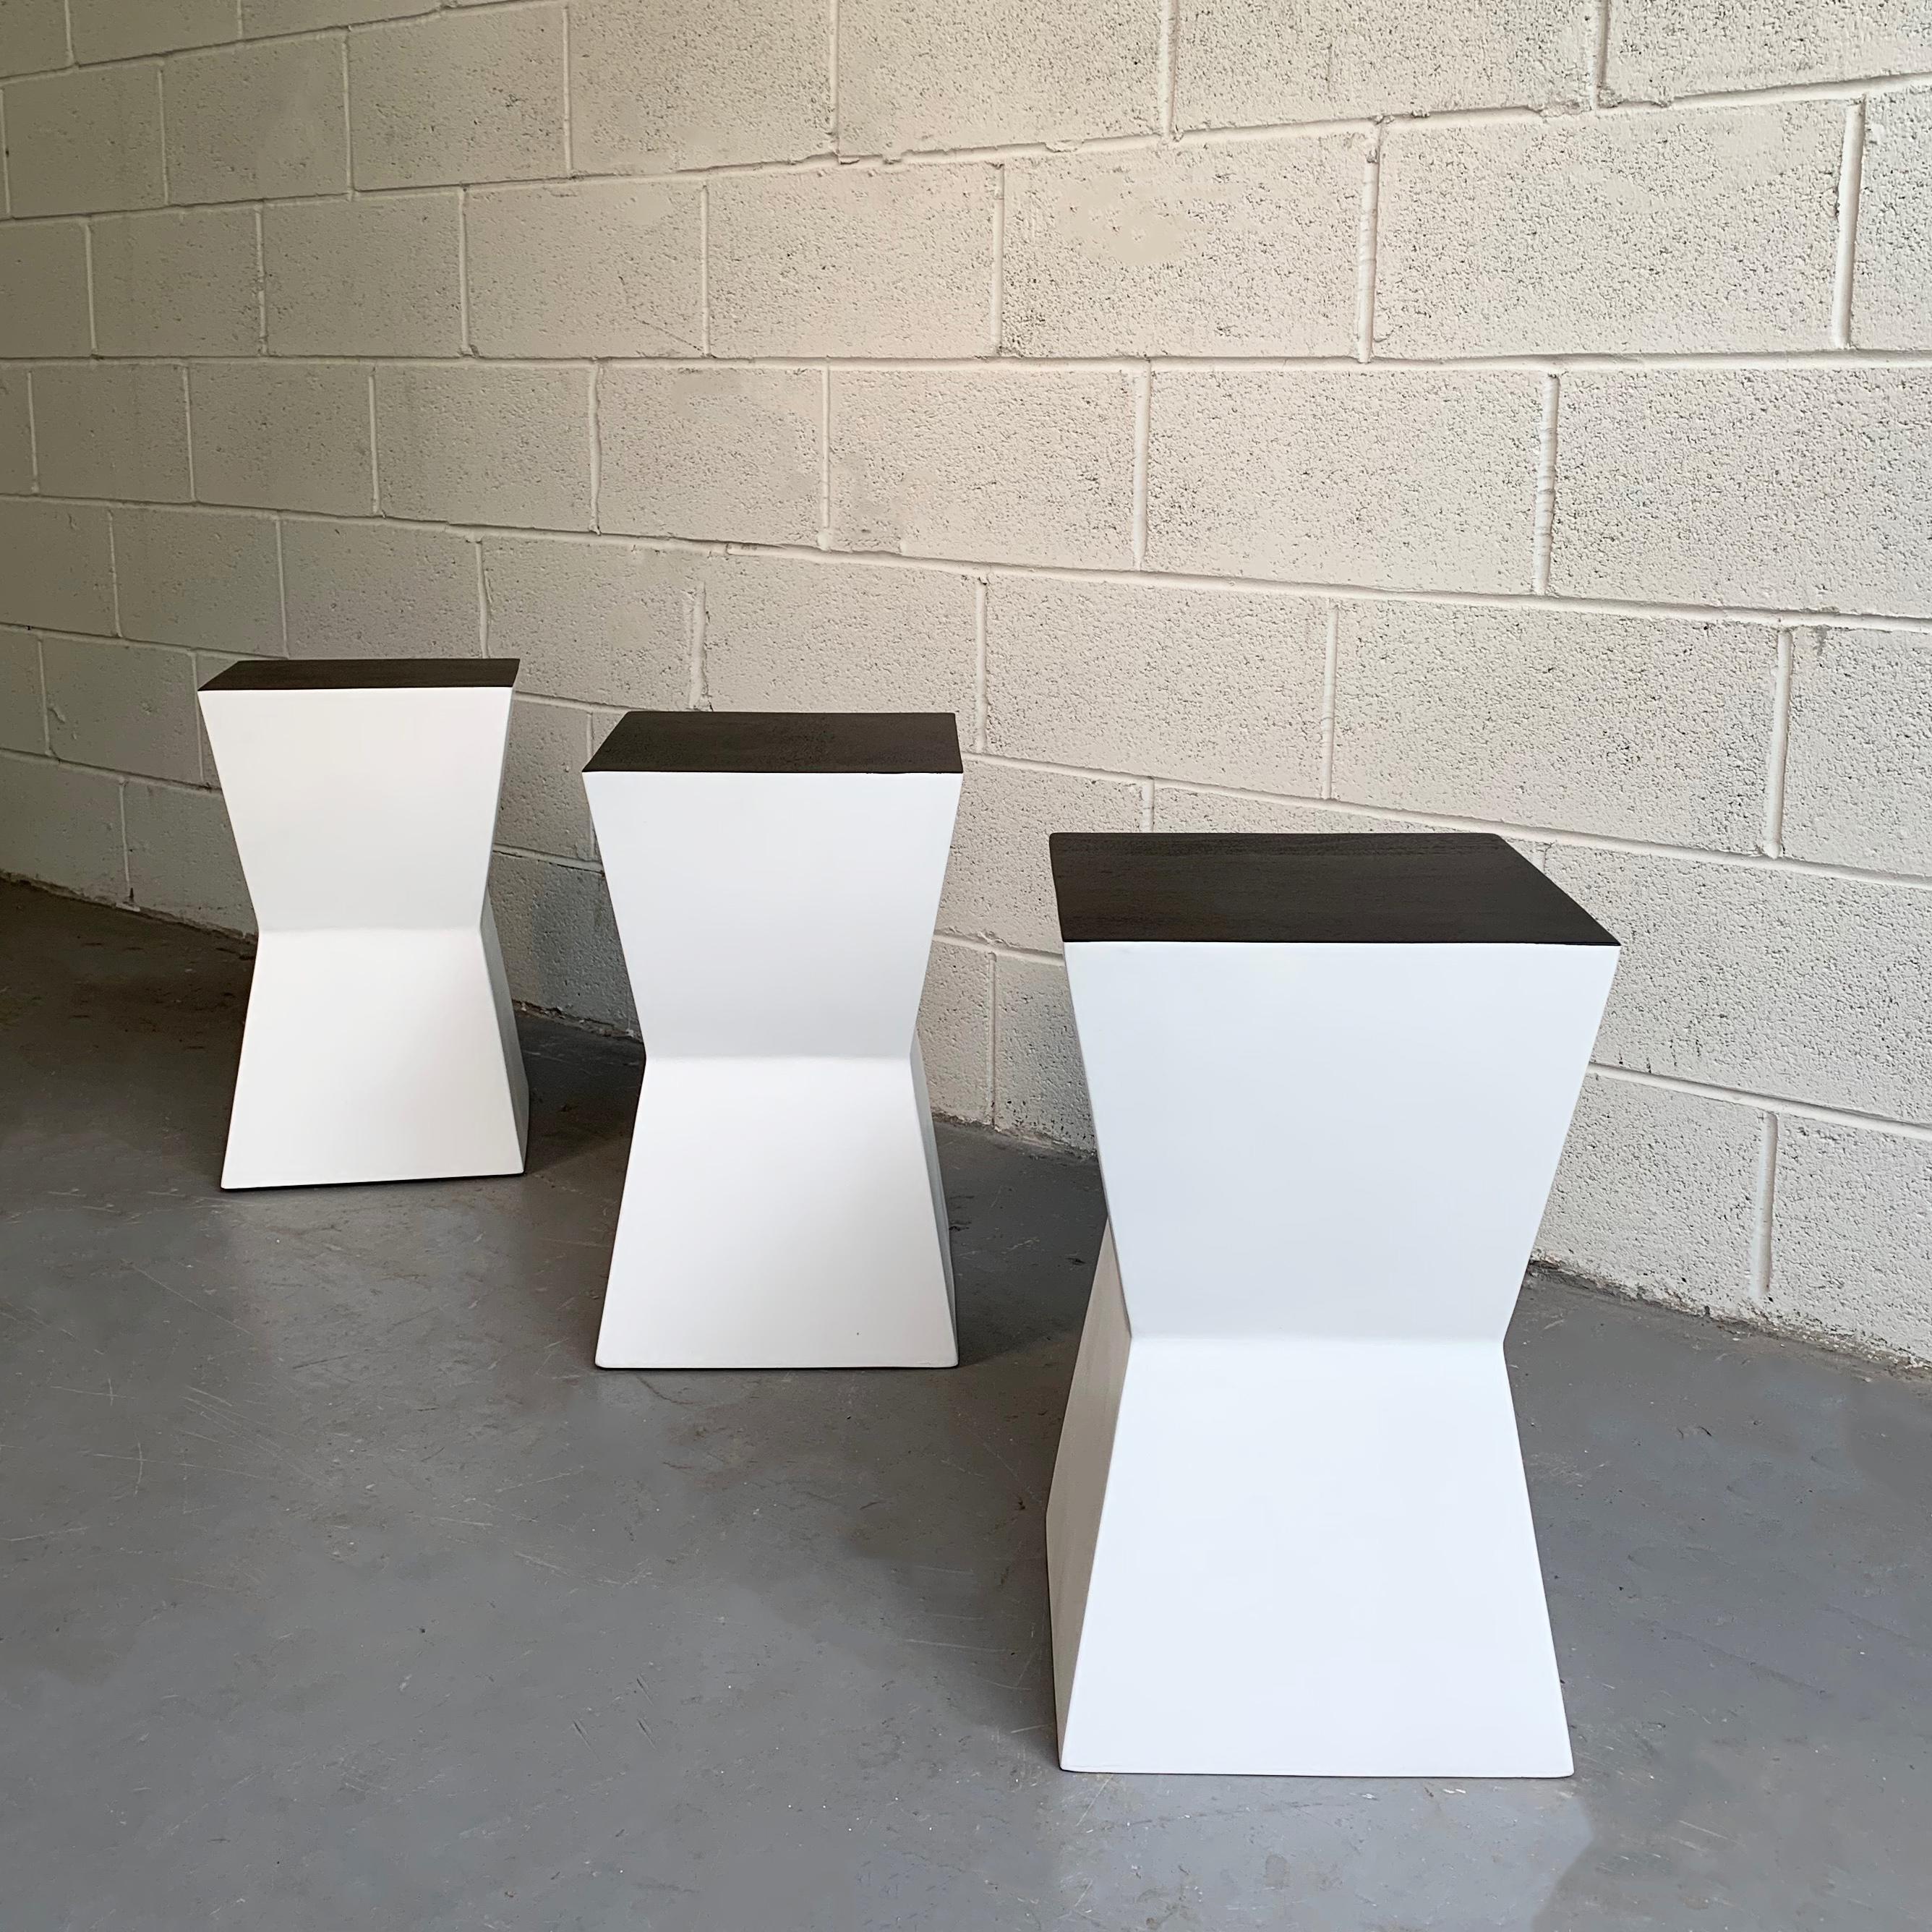 Lacquered Modernist Geometric Stool Stands